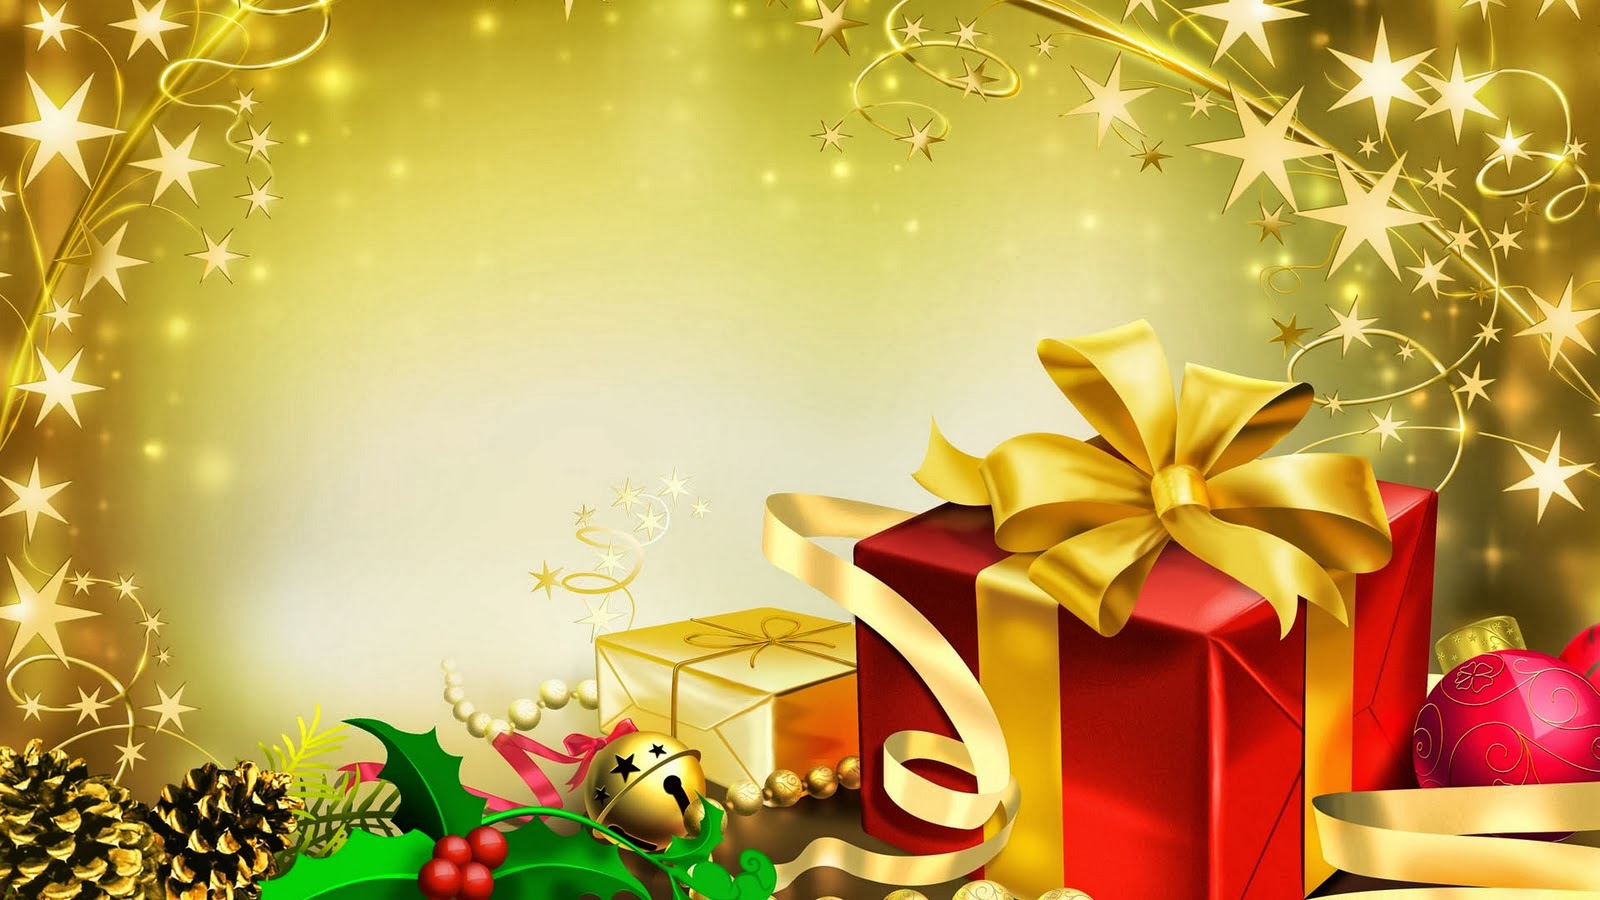 Gallery For Gt HD Christmas Wallpaper 1080p